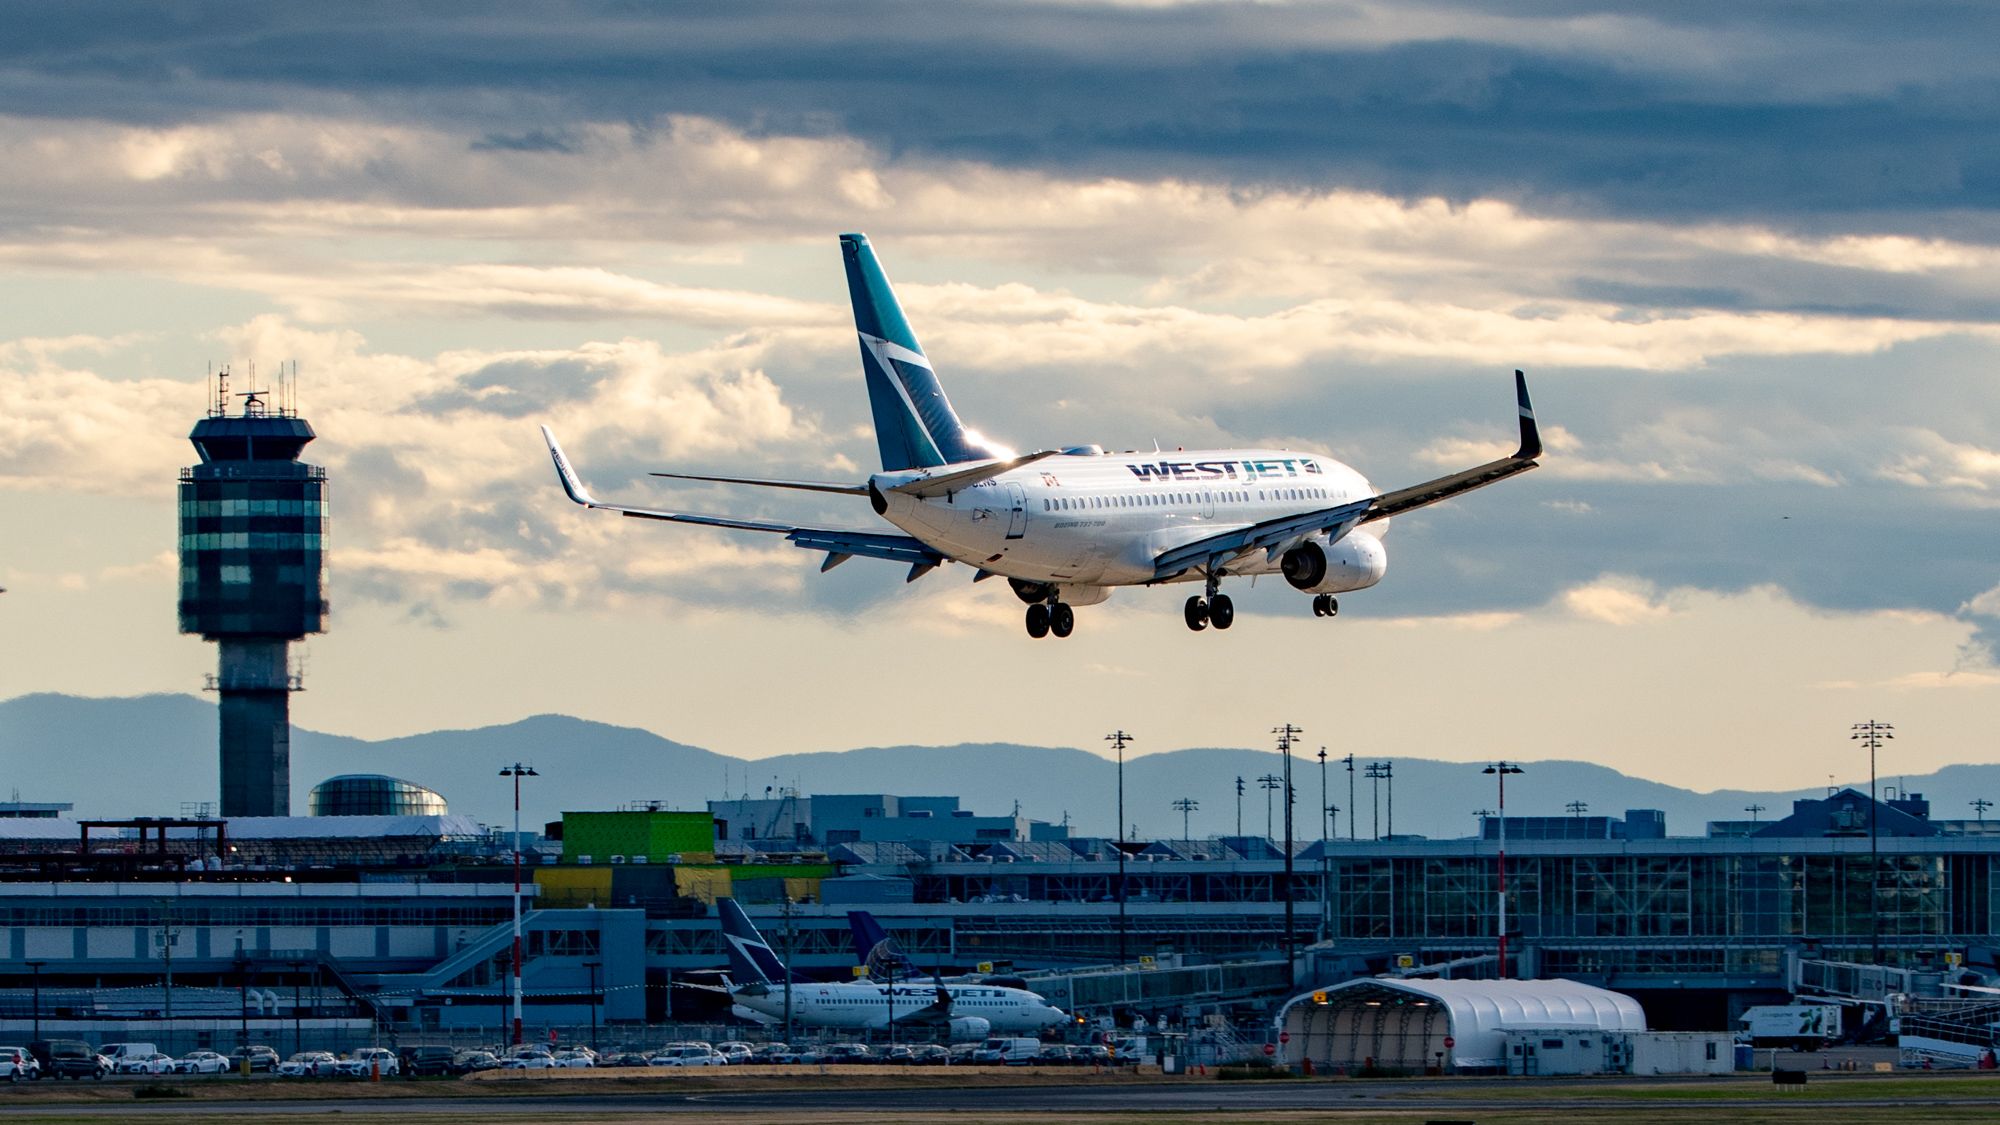 WestJet Boeing 737-700 on Short Final Past YVR Construction and Air Control Tower - 2019-06-18